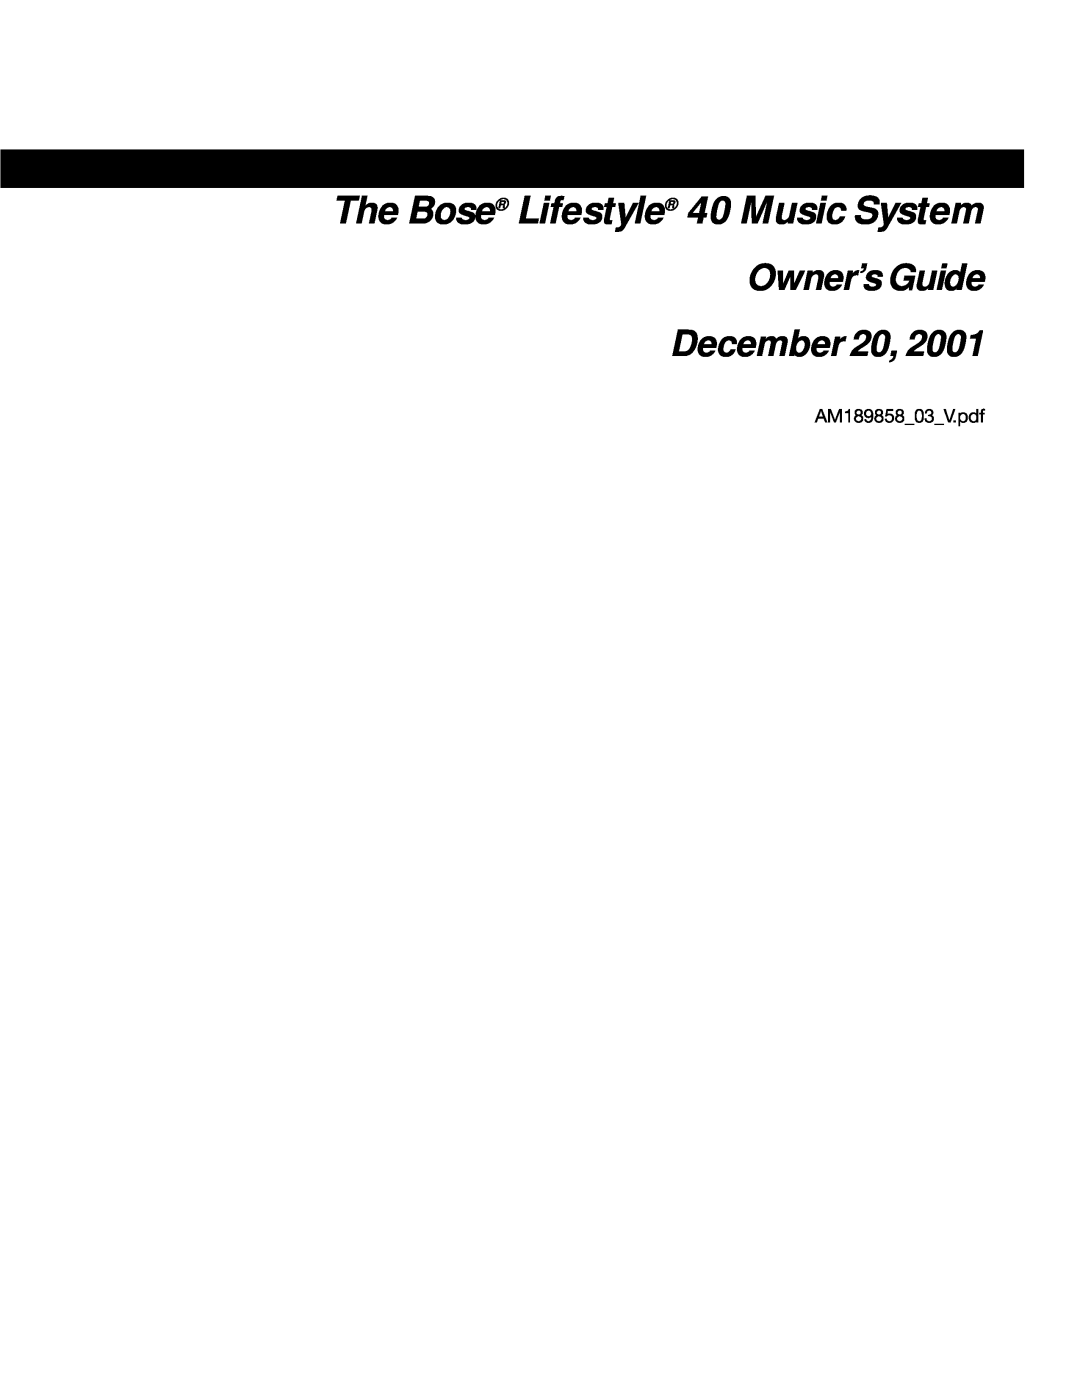 Bose manual The Bose Lifestyle 40 Music System, Owner’s Guide December 20, AM189858_03_V.pdf 